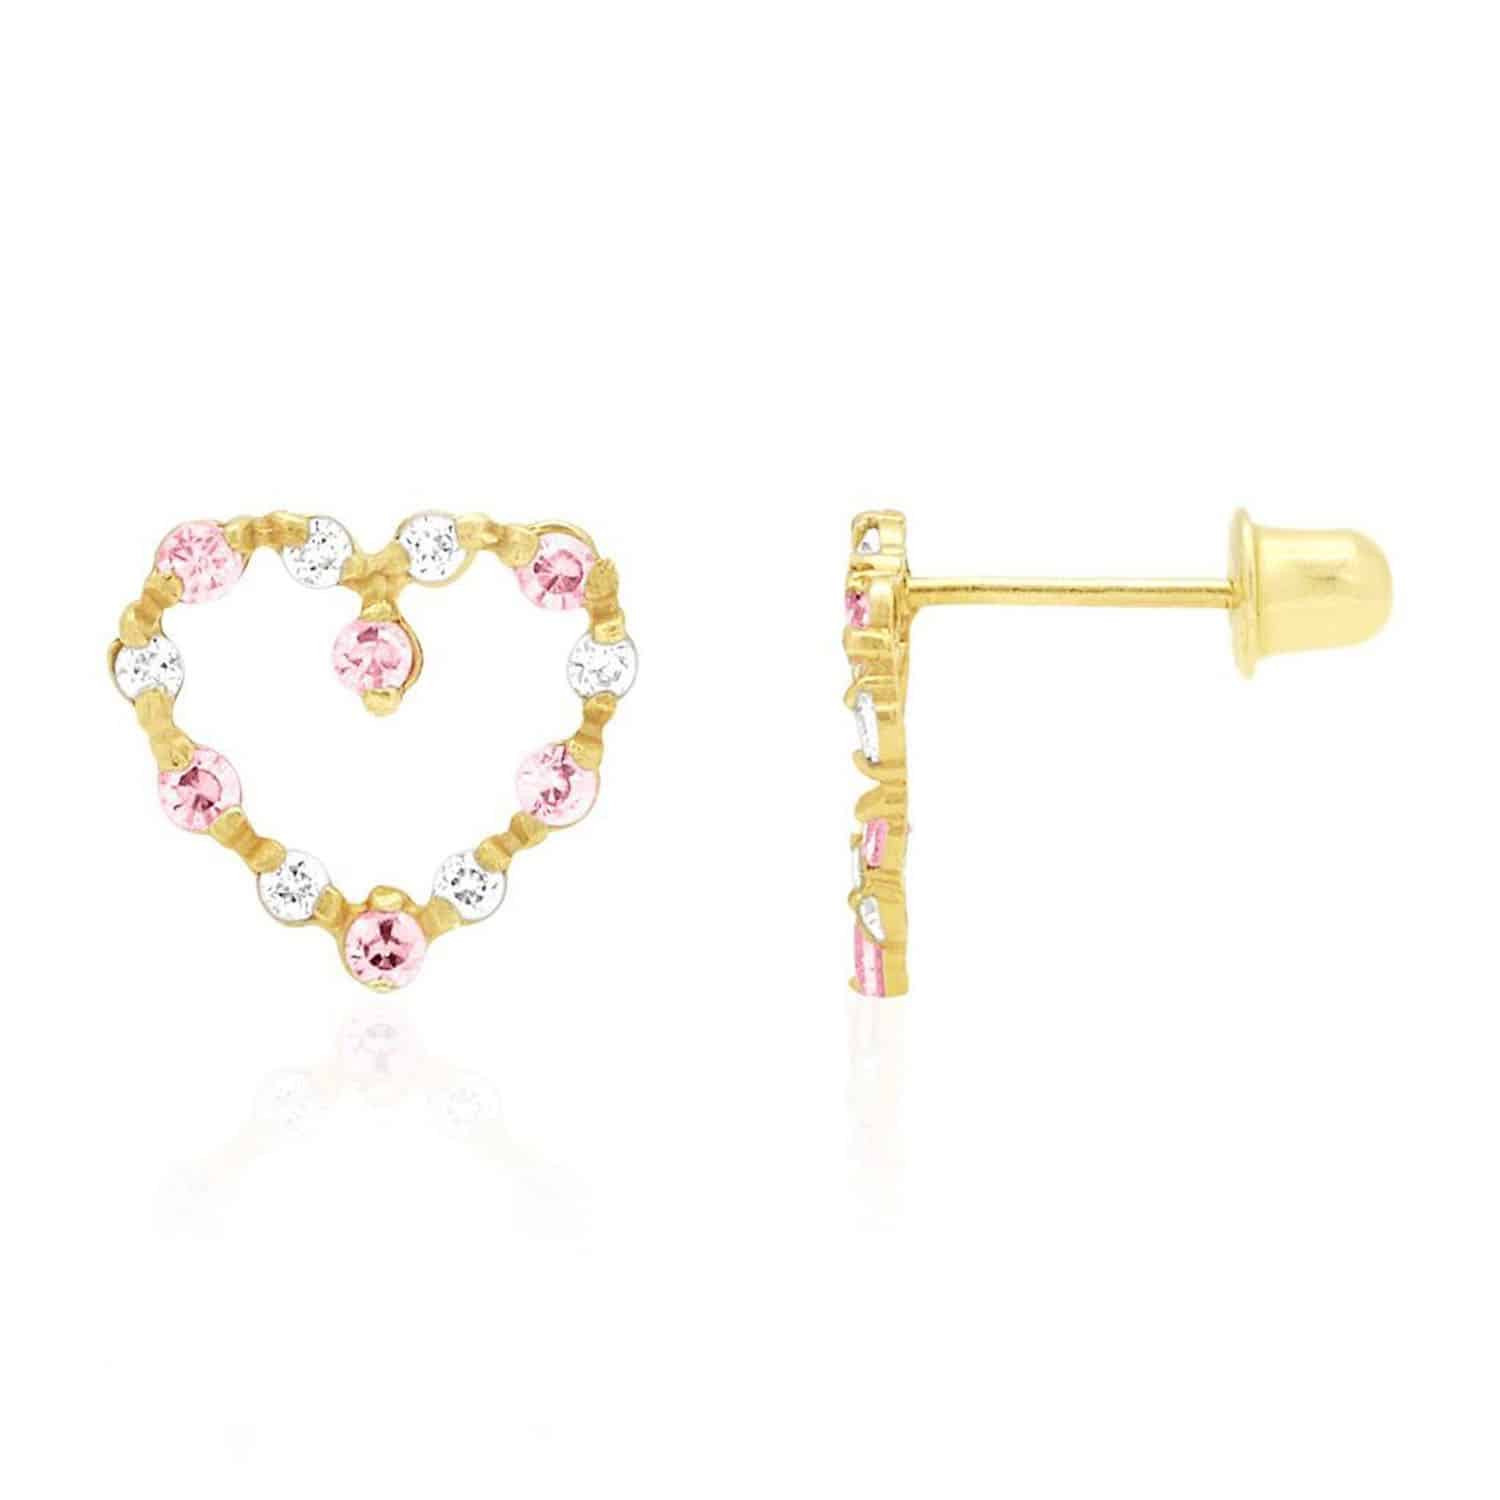 0.75CTW Simulated Gemstone 14k Yellow Gold Heart Screw Back Stud Earrings - October - Pink Tourmaline